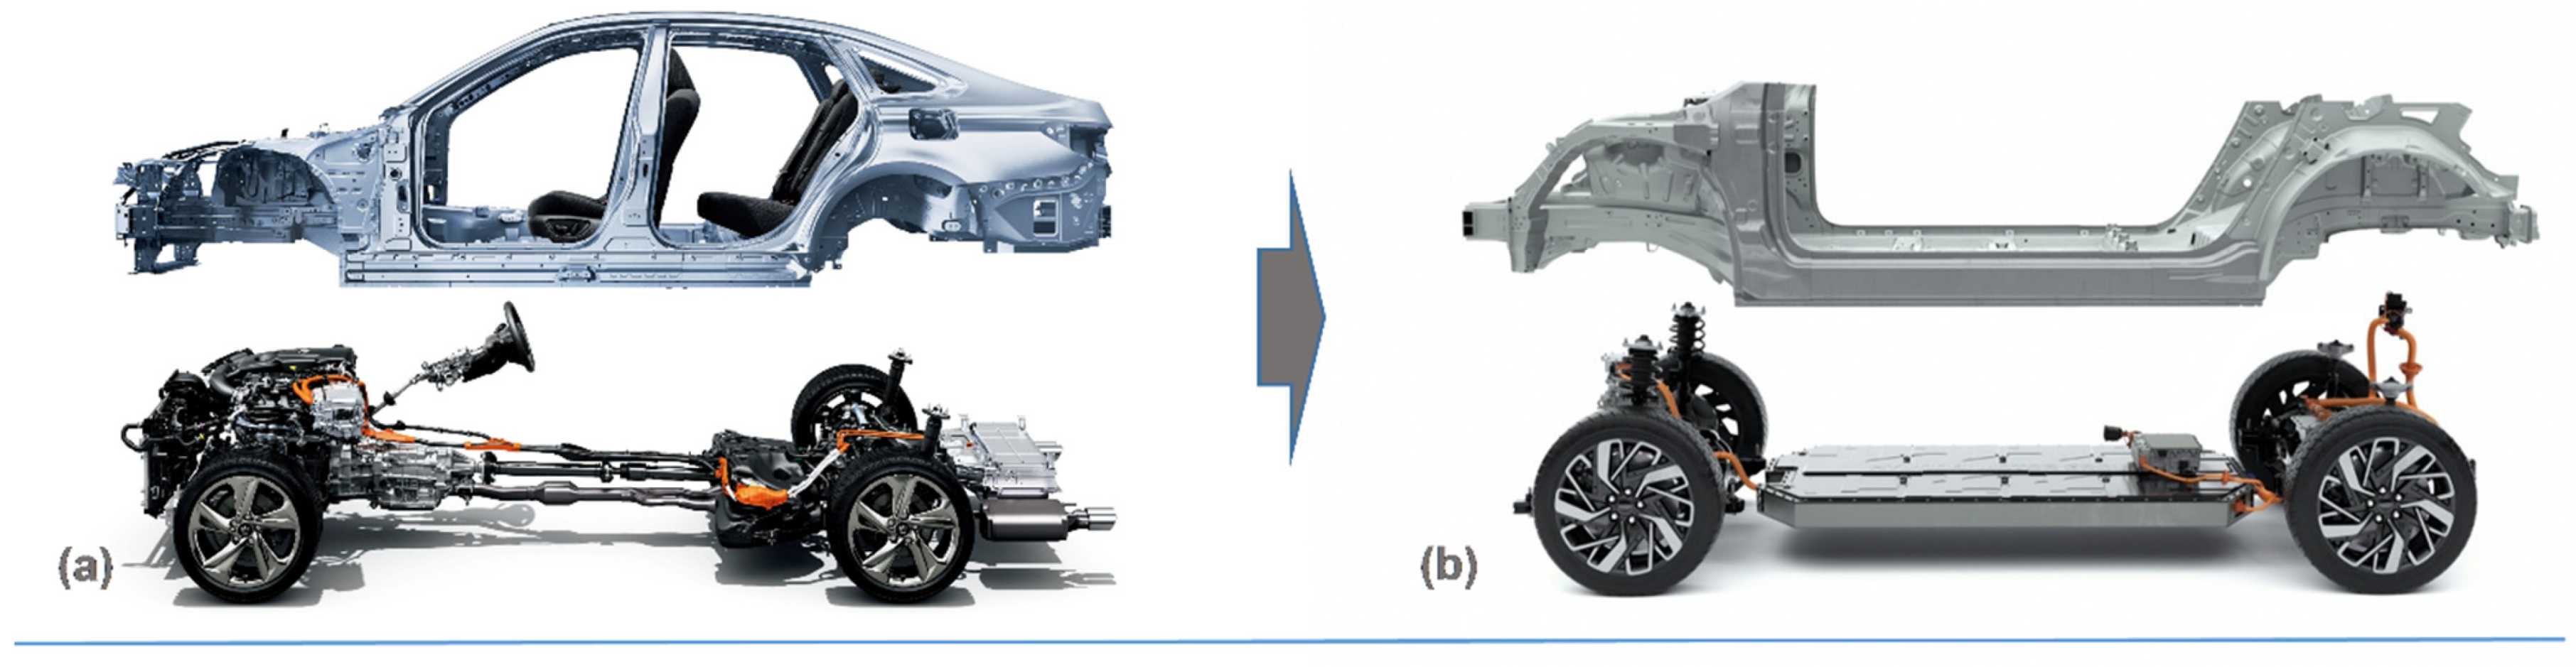 Figure 4. Architecture difference between internal combustion engine vehicles and battery electric vehicles: (a) ICE, Toyota Crown redesigned platform, 2018 [18], and (b) BEV, Hyundai/Kia/Genesis E-GMP platform, 2021 [19].